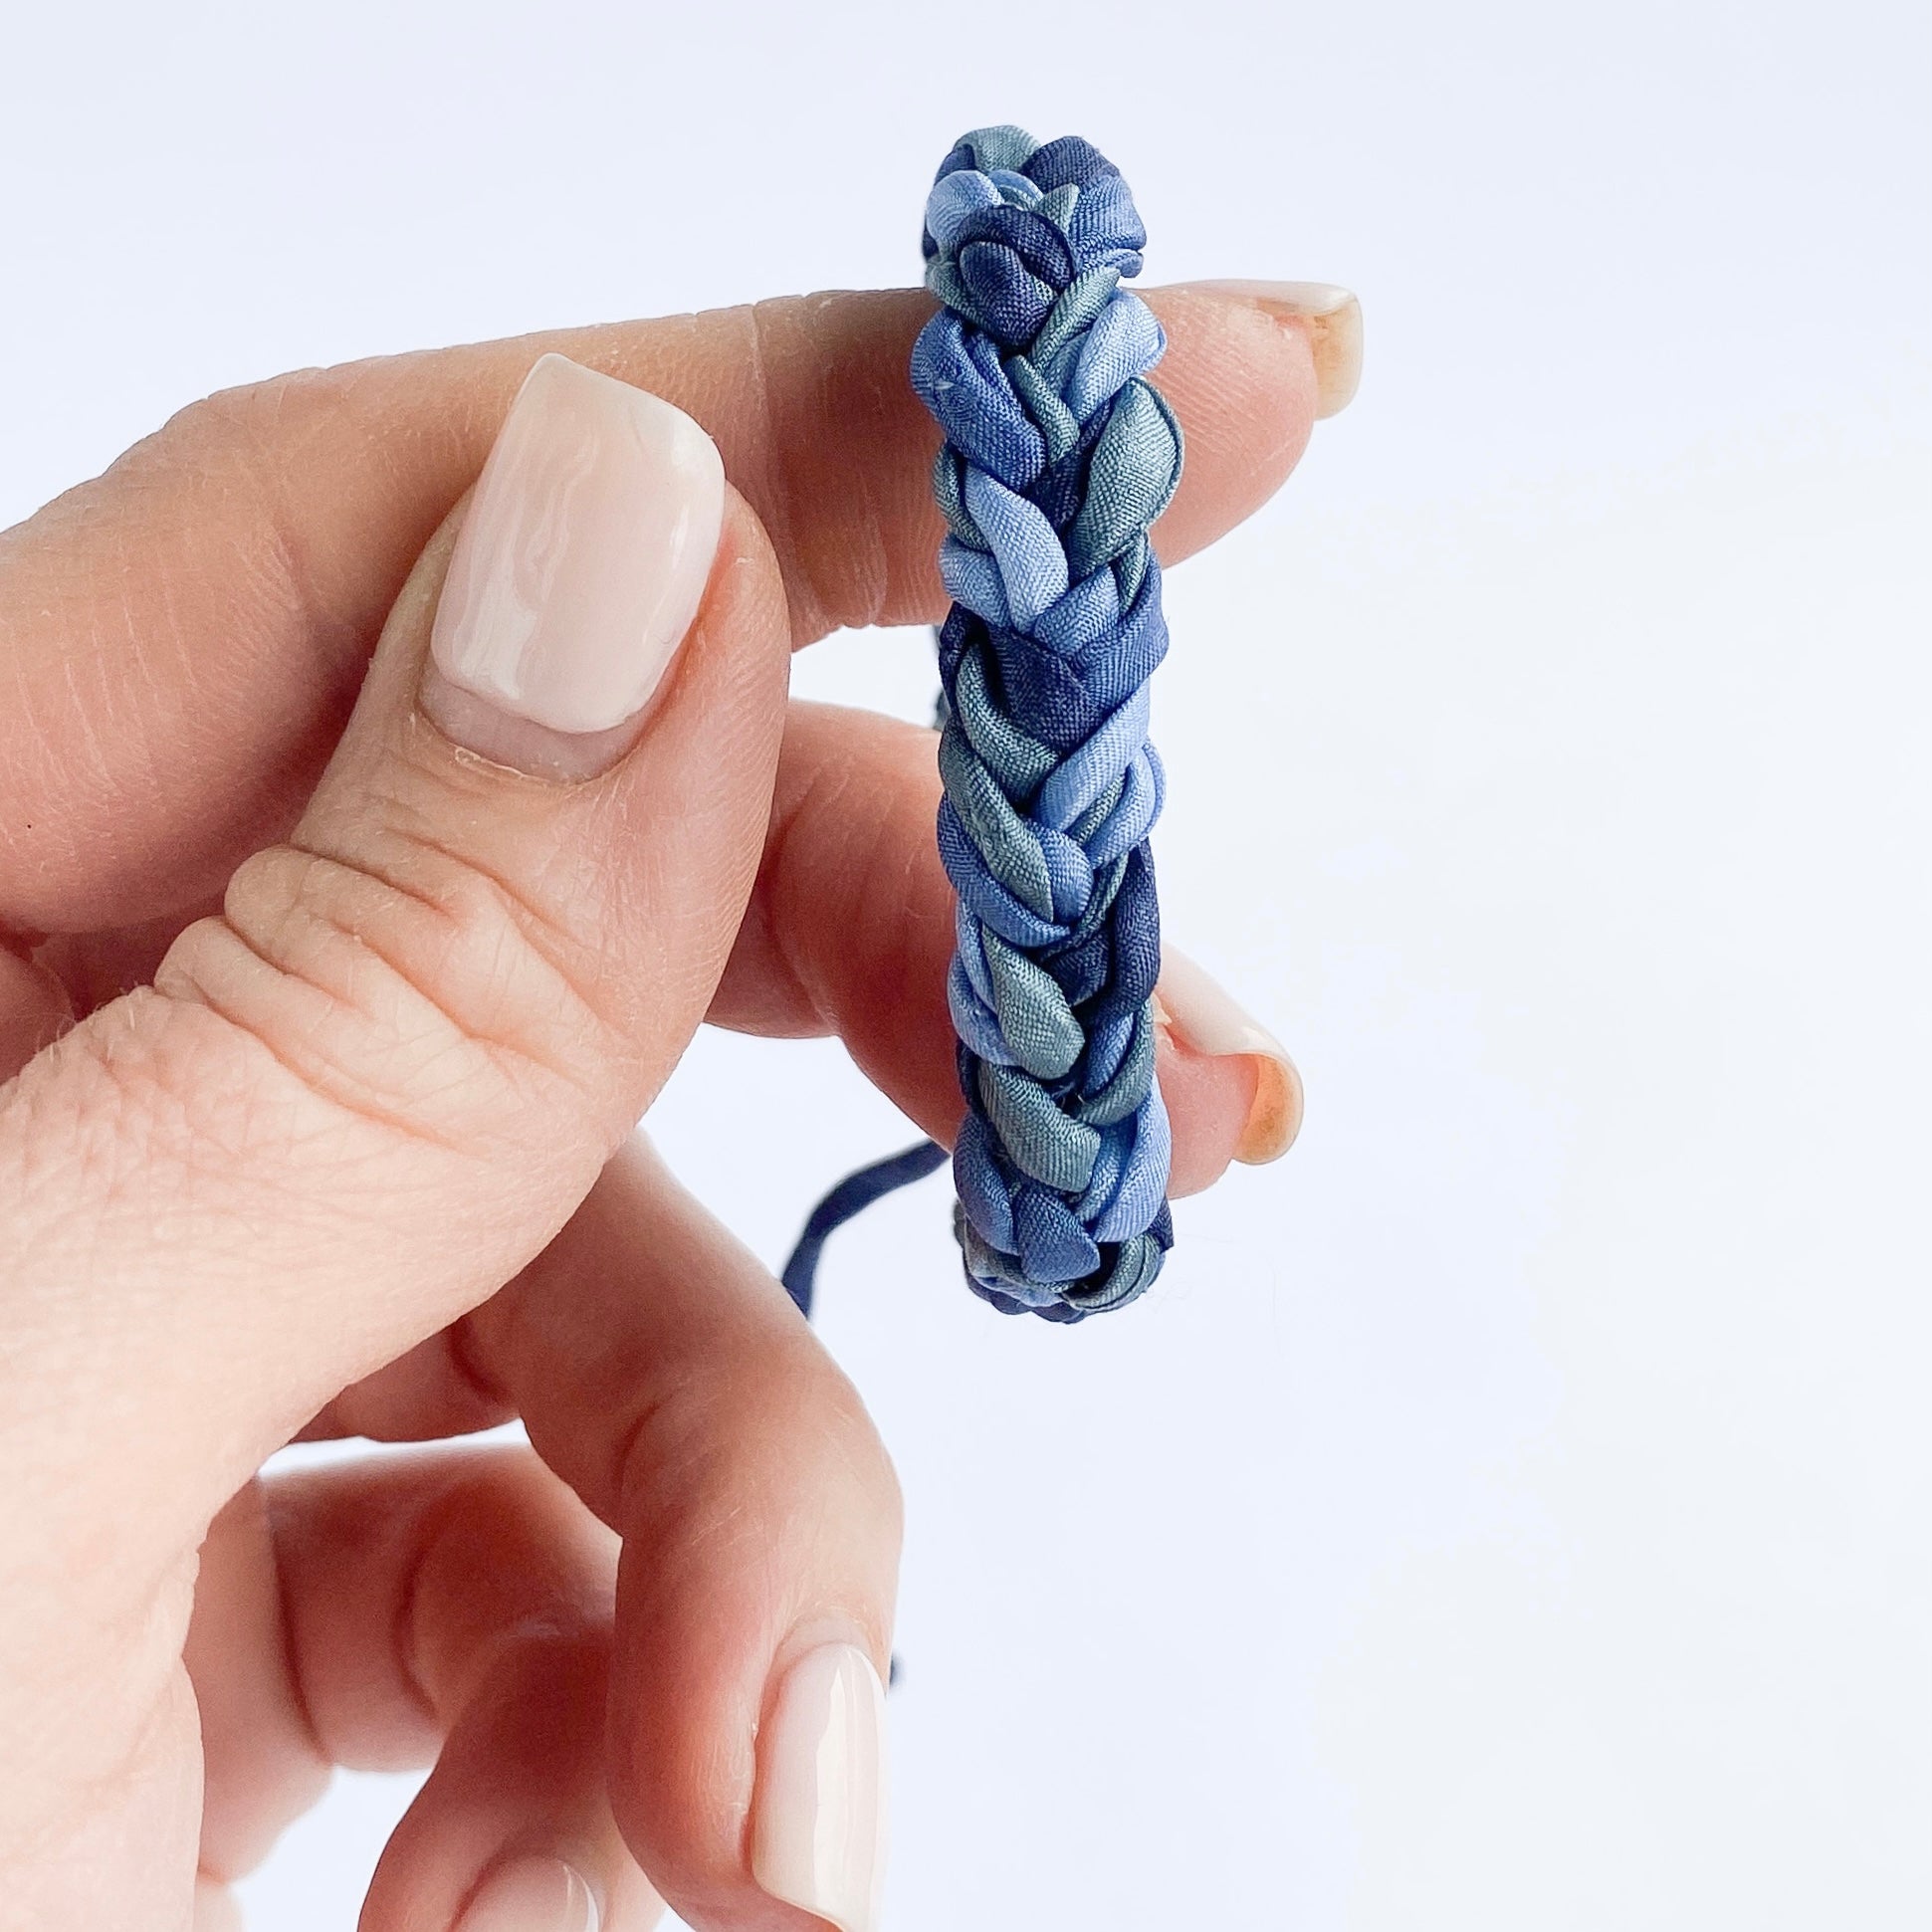 How to braid 8 strand bracelet using leather cords 